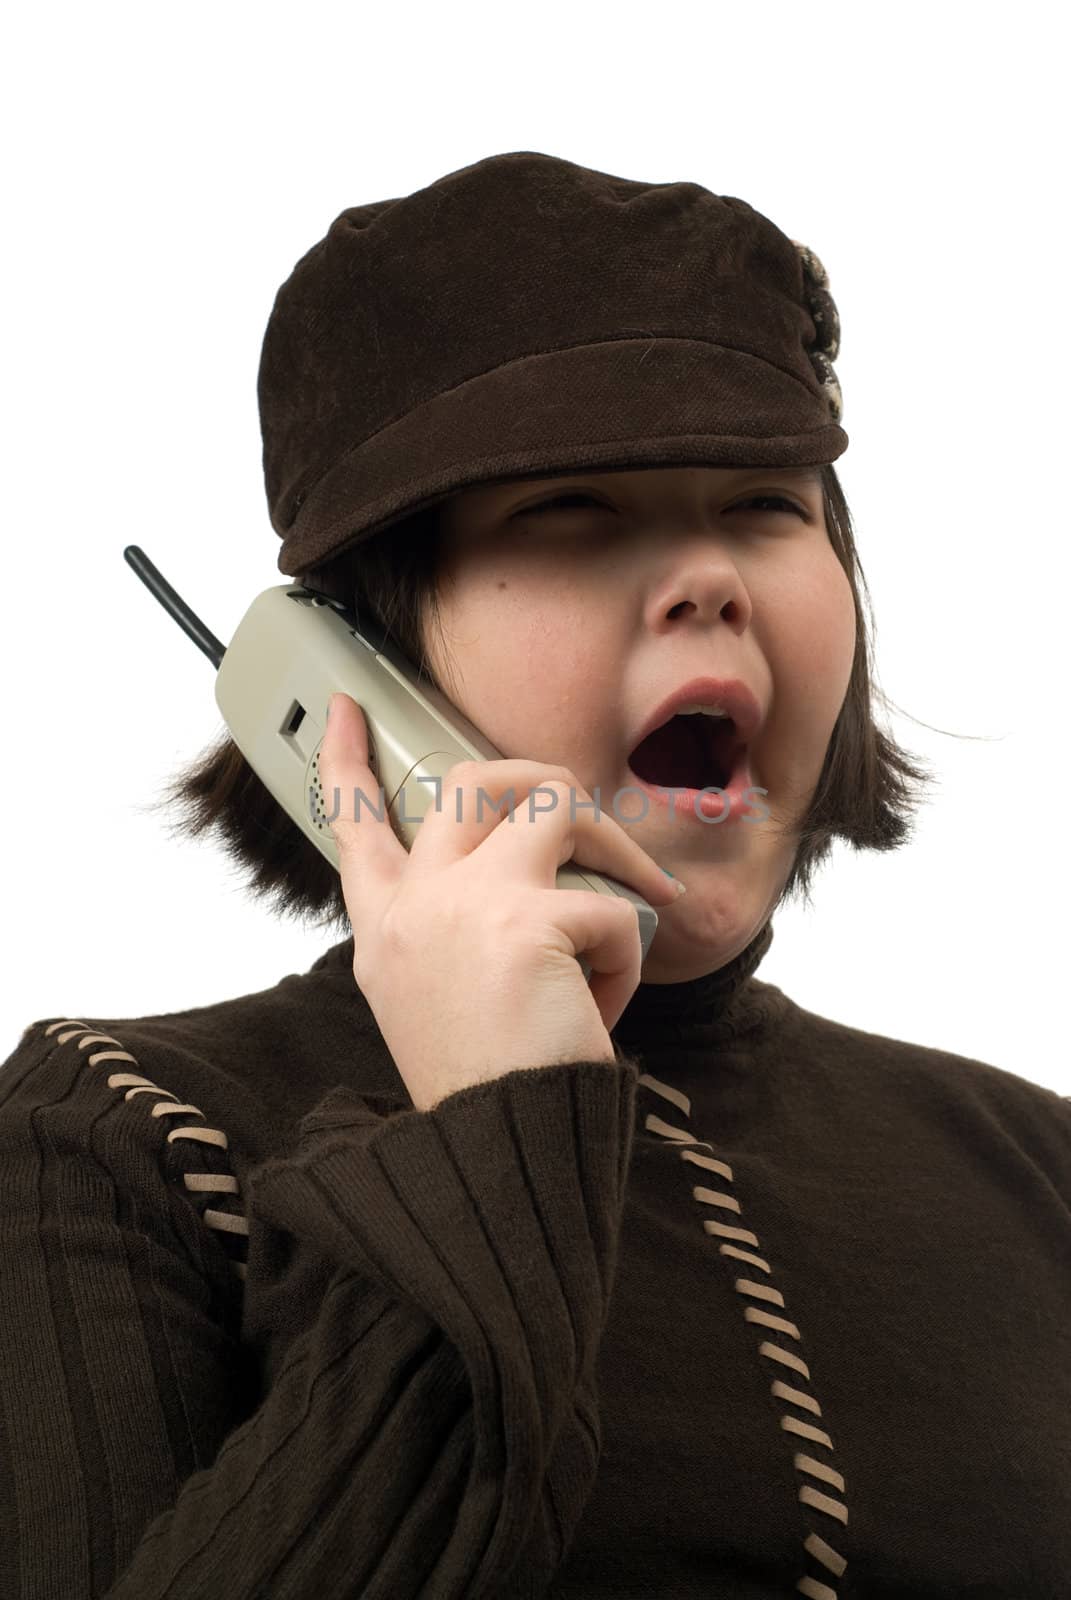 A young girl yawning at a boring conversation she is having on a cordless phone, isolated against a white background